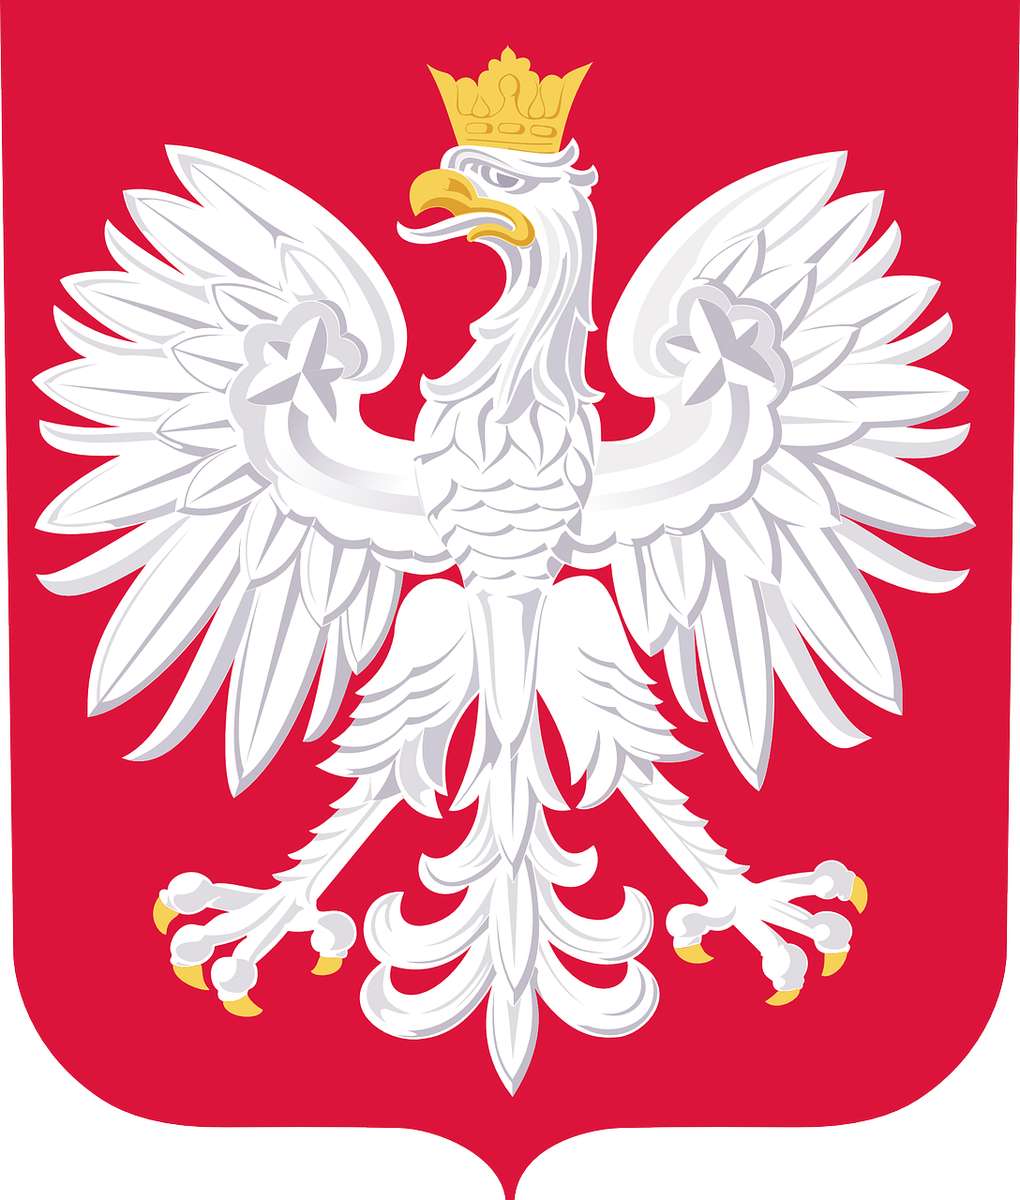 Coat of arms of Poland online puzzle